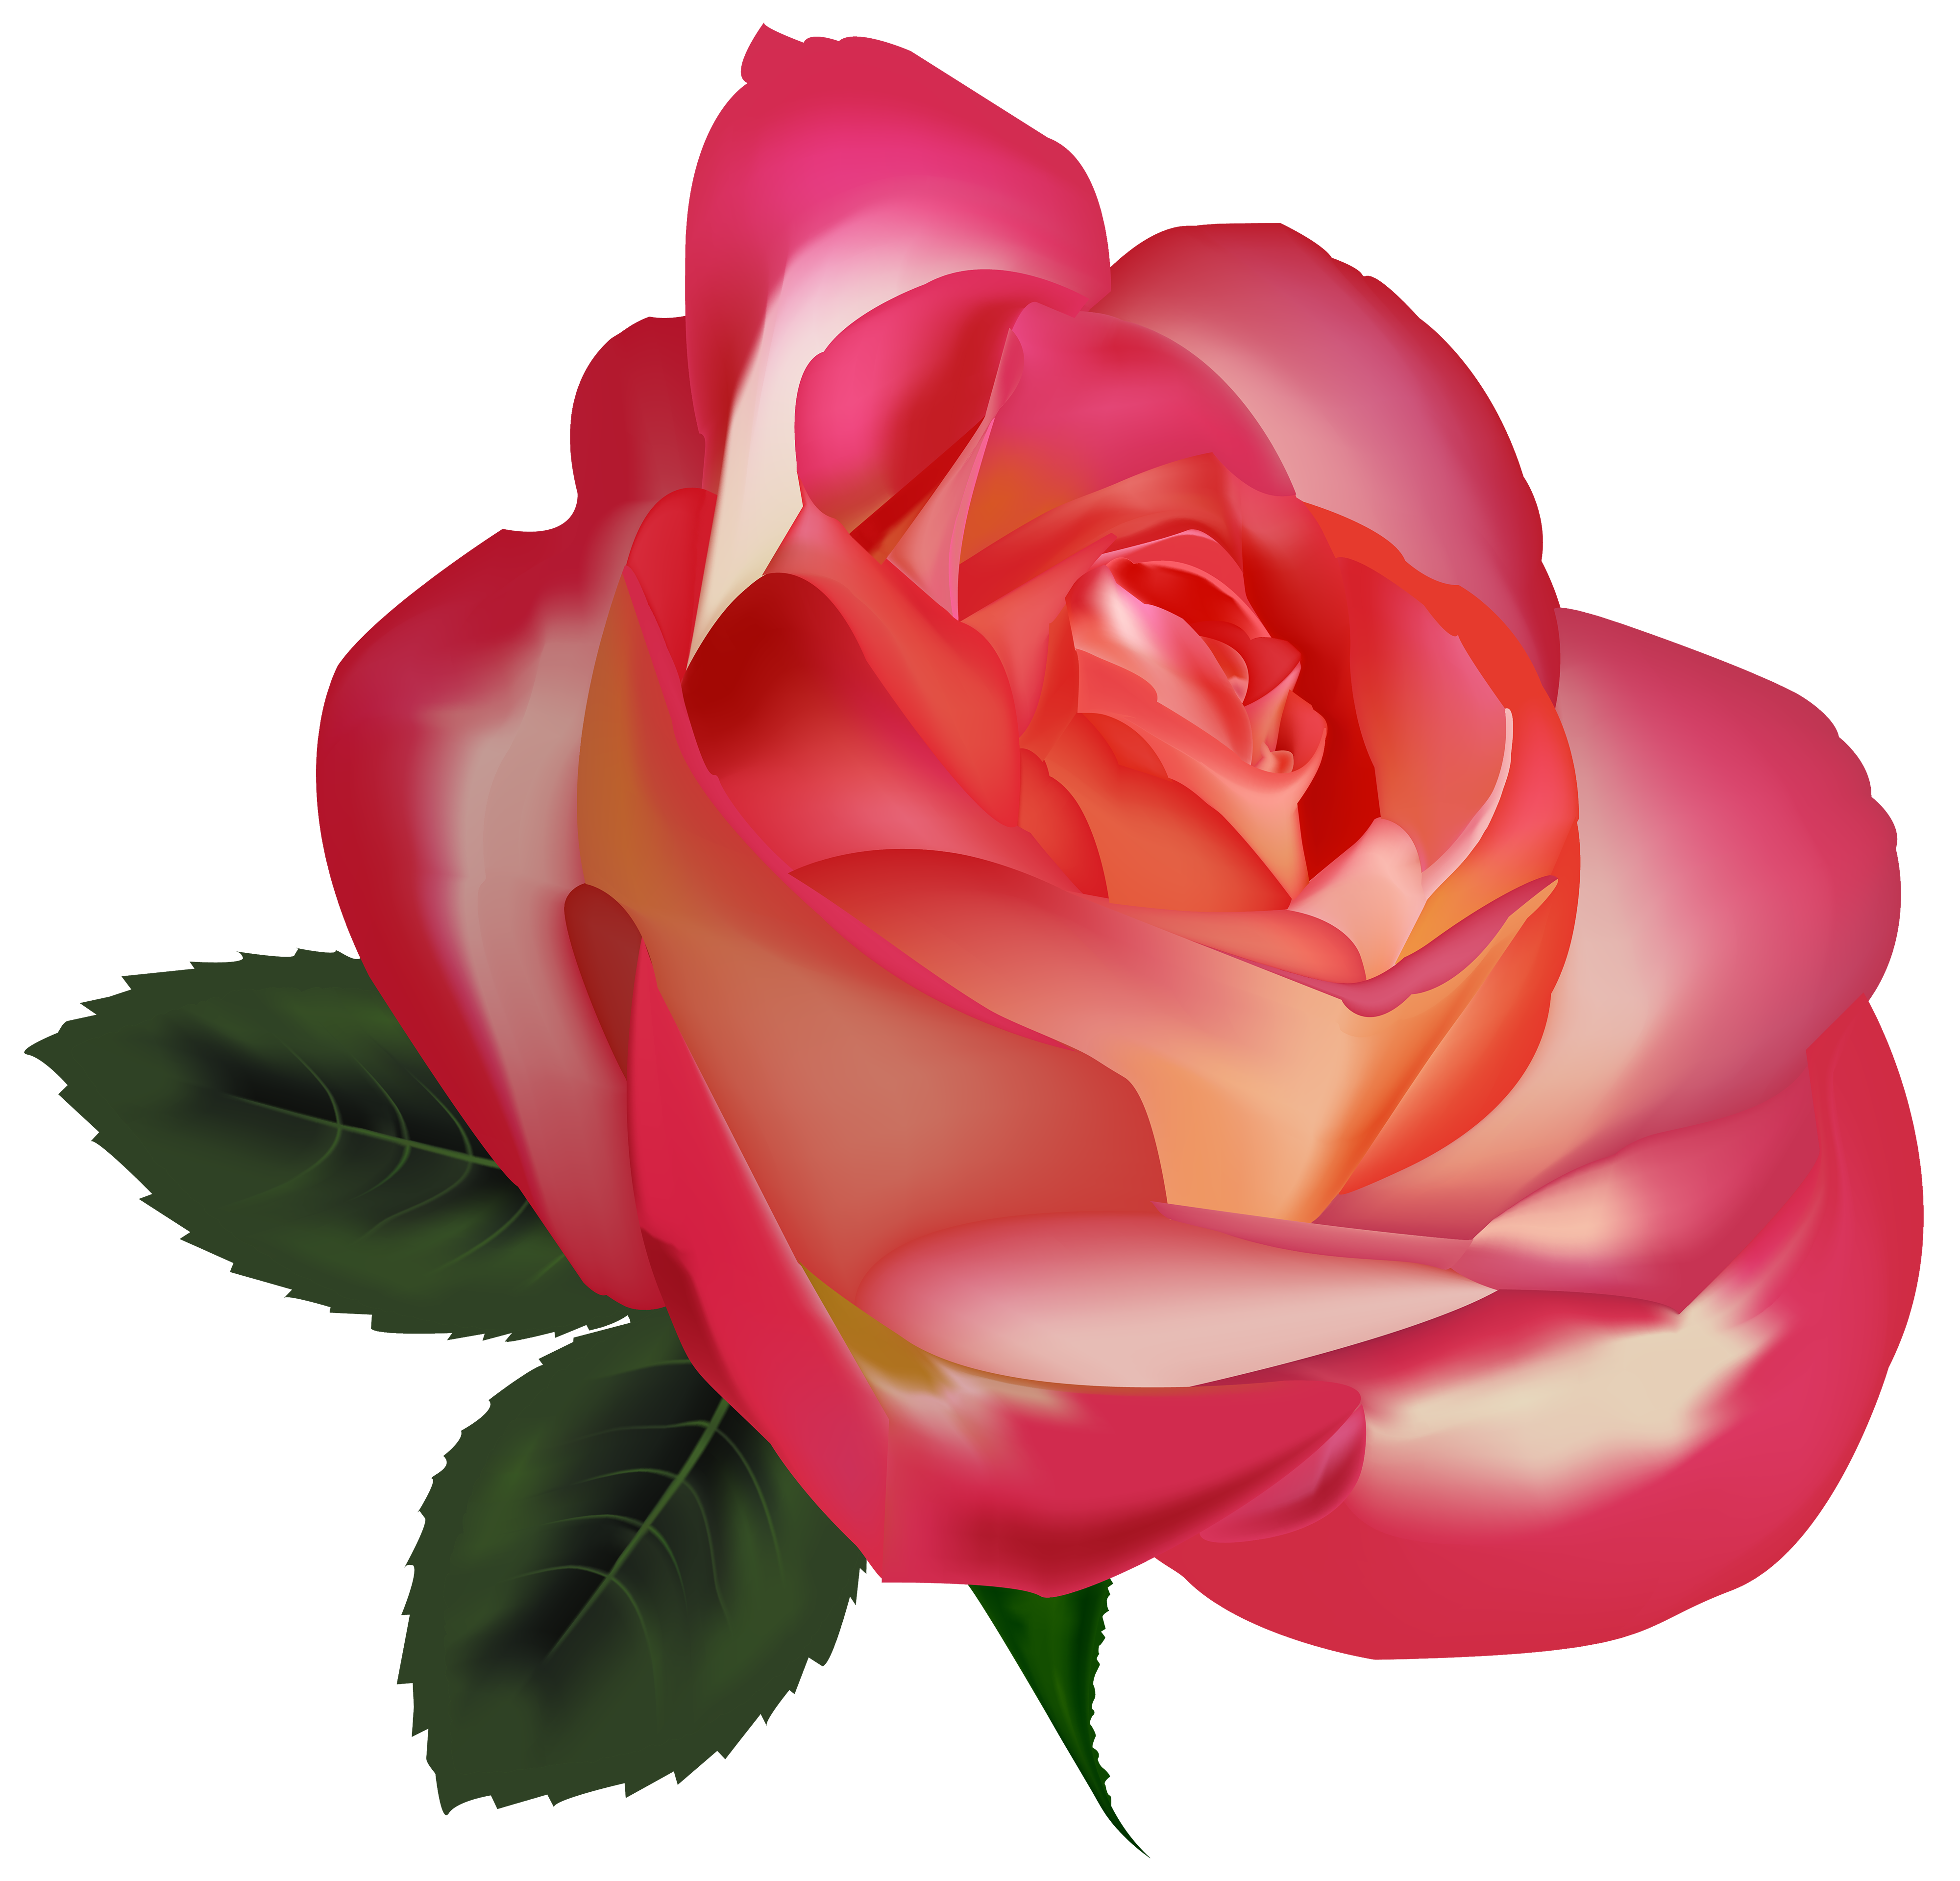 Beautiful clipart flower. Rose png image best